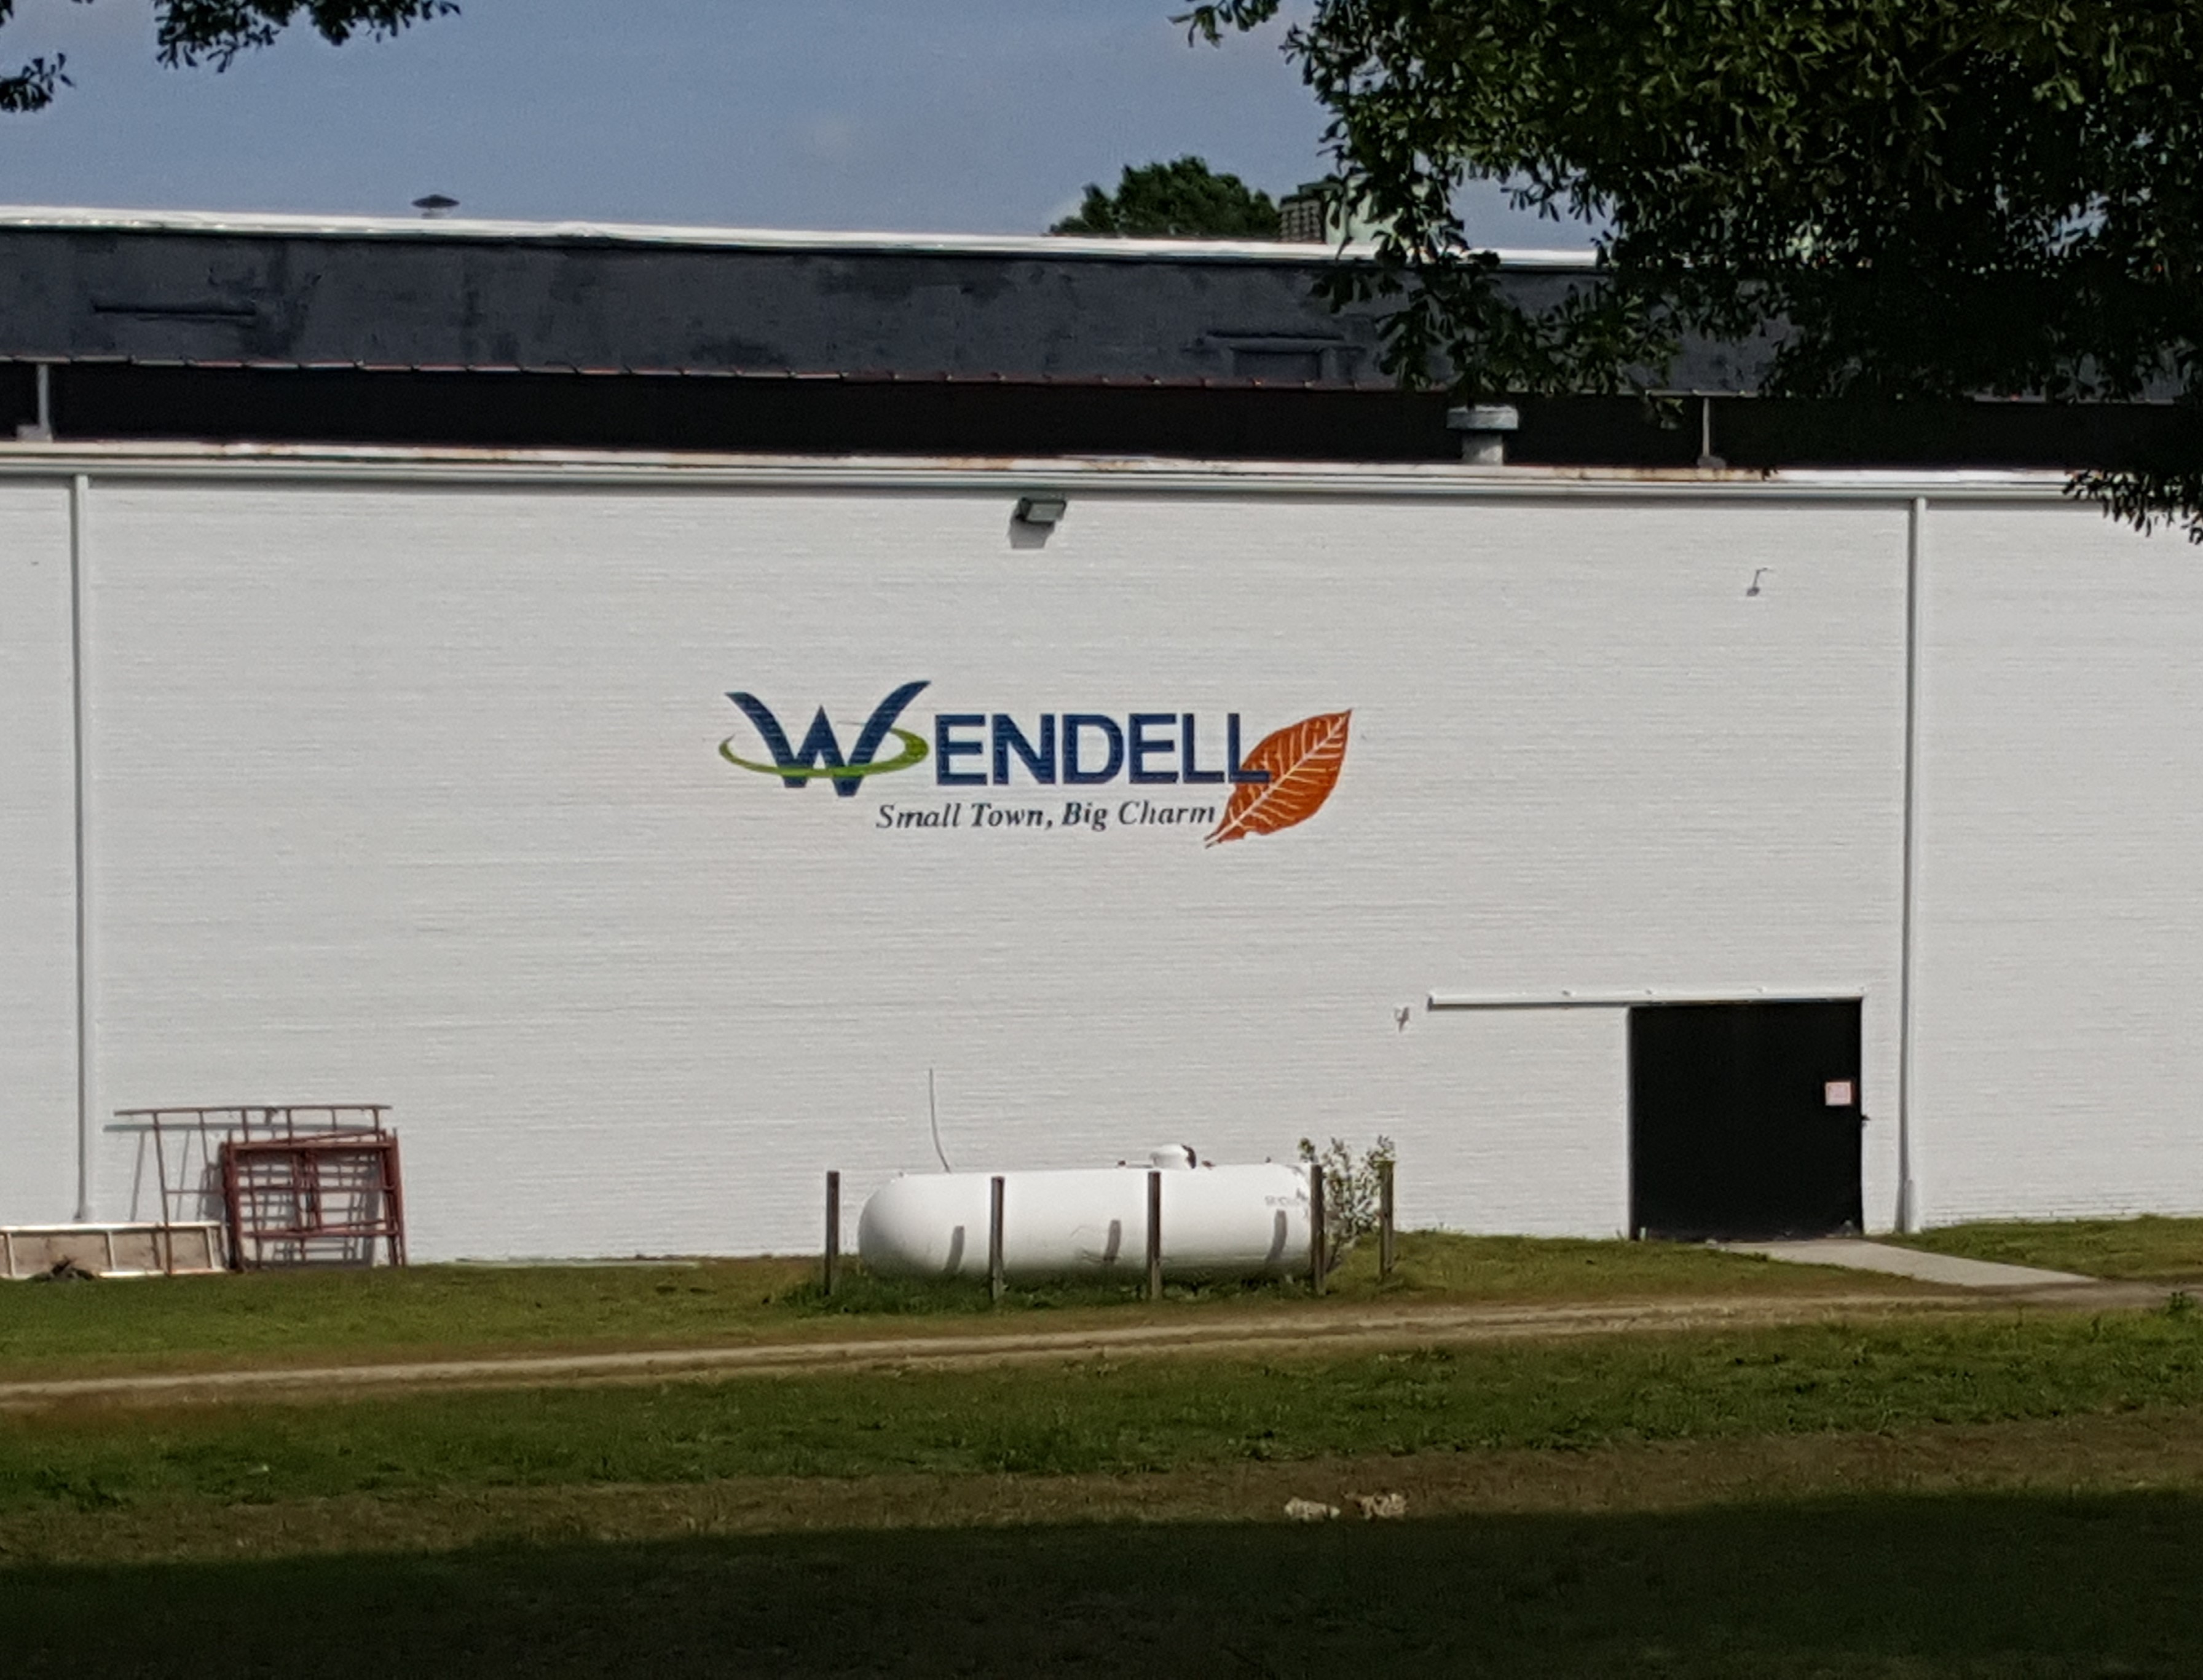 Wendell: Small Town, Big Charm Mural 